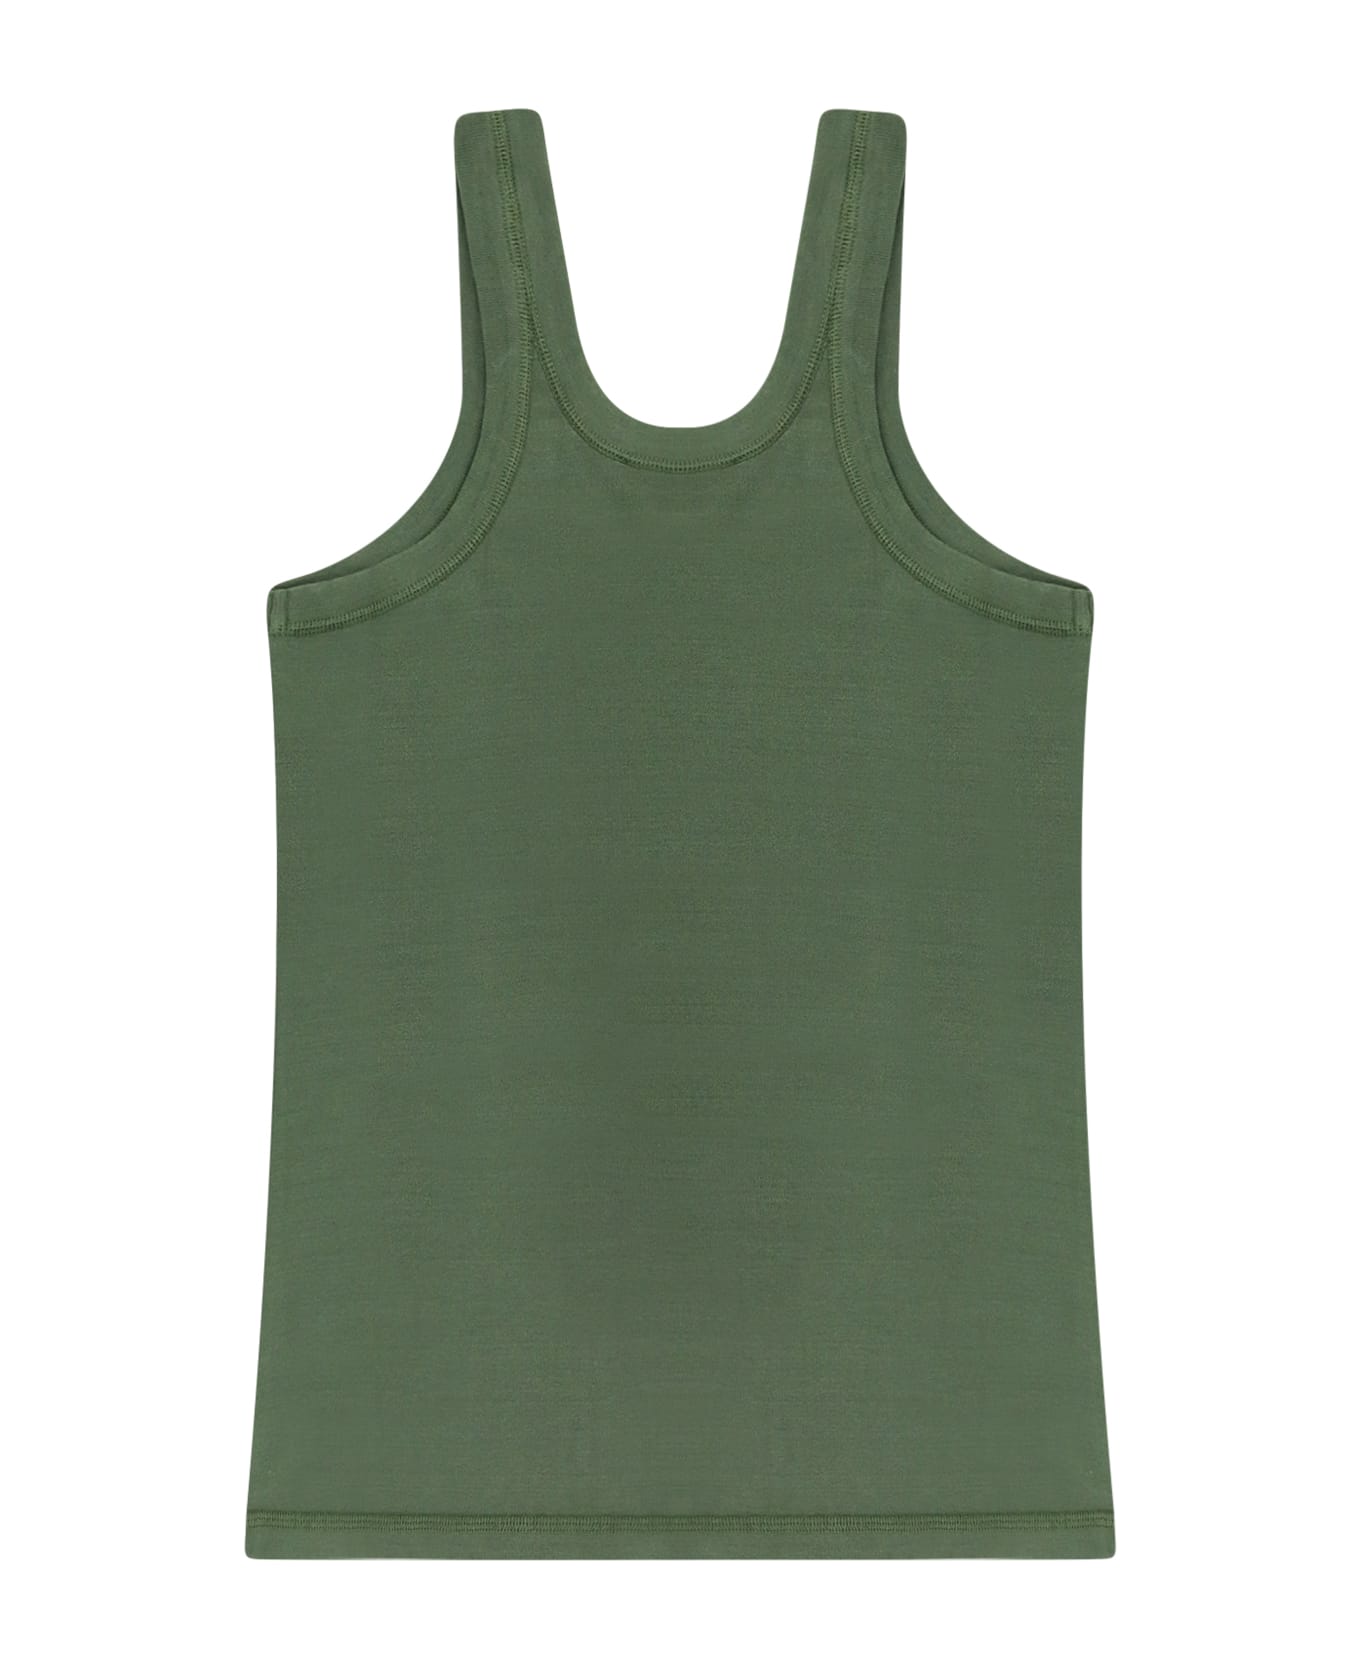 Lemaire Tank Top - Green